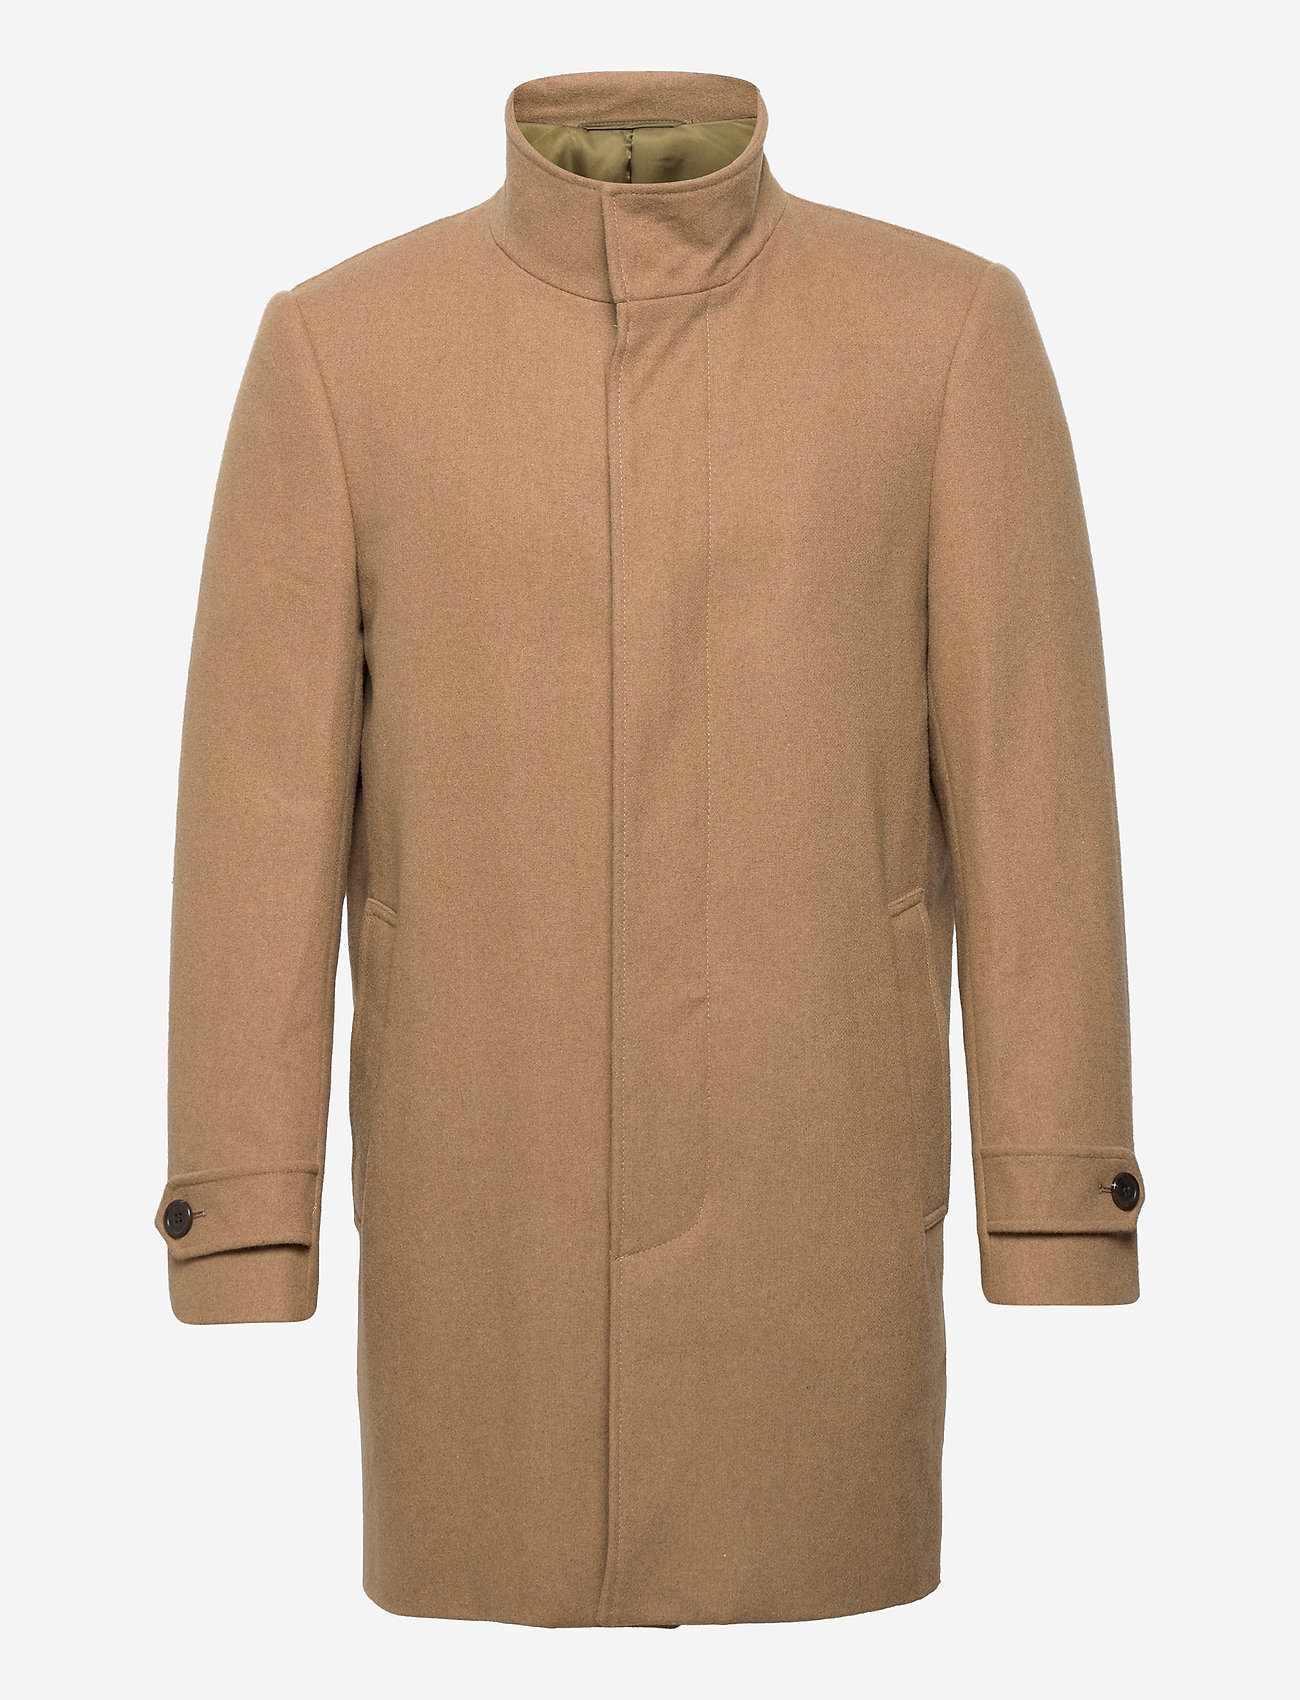 Lindbergh - Recycled wool funnel neck coat - talvejoped - camel - 0